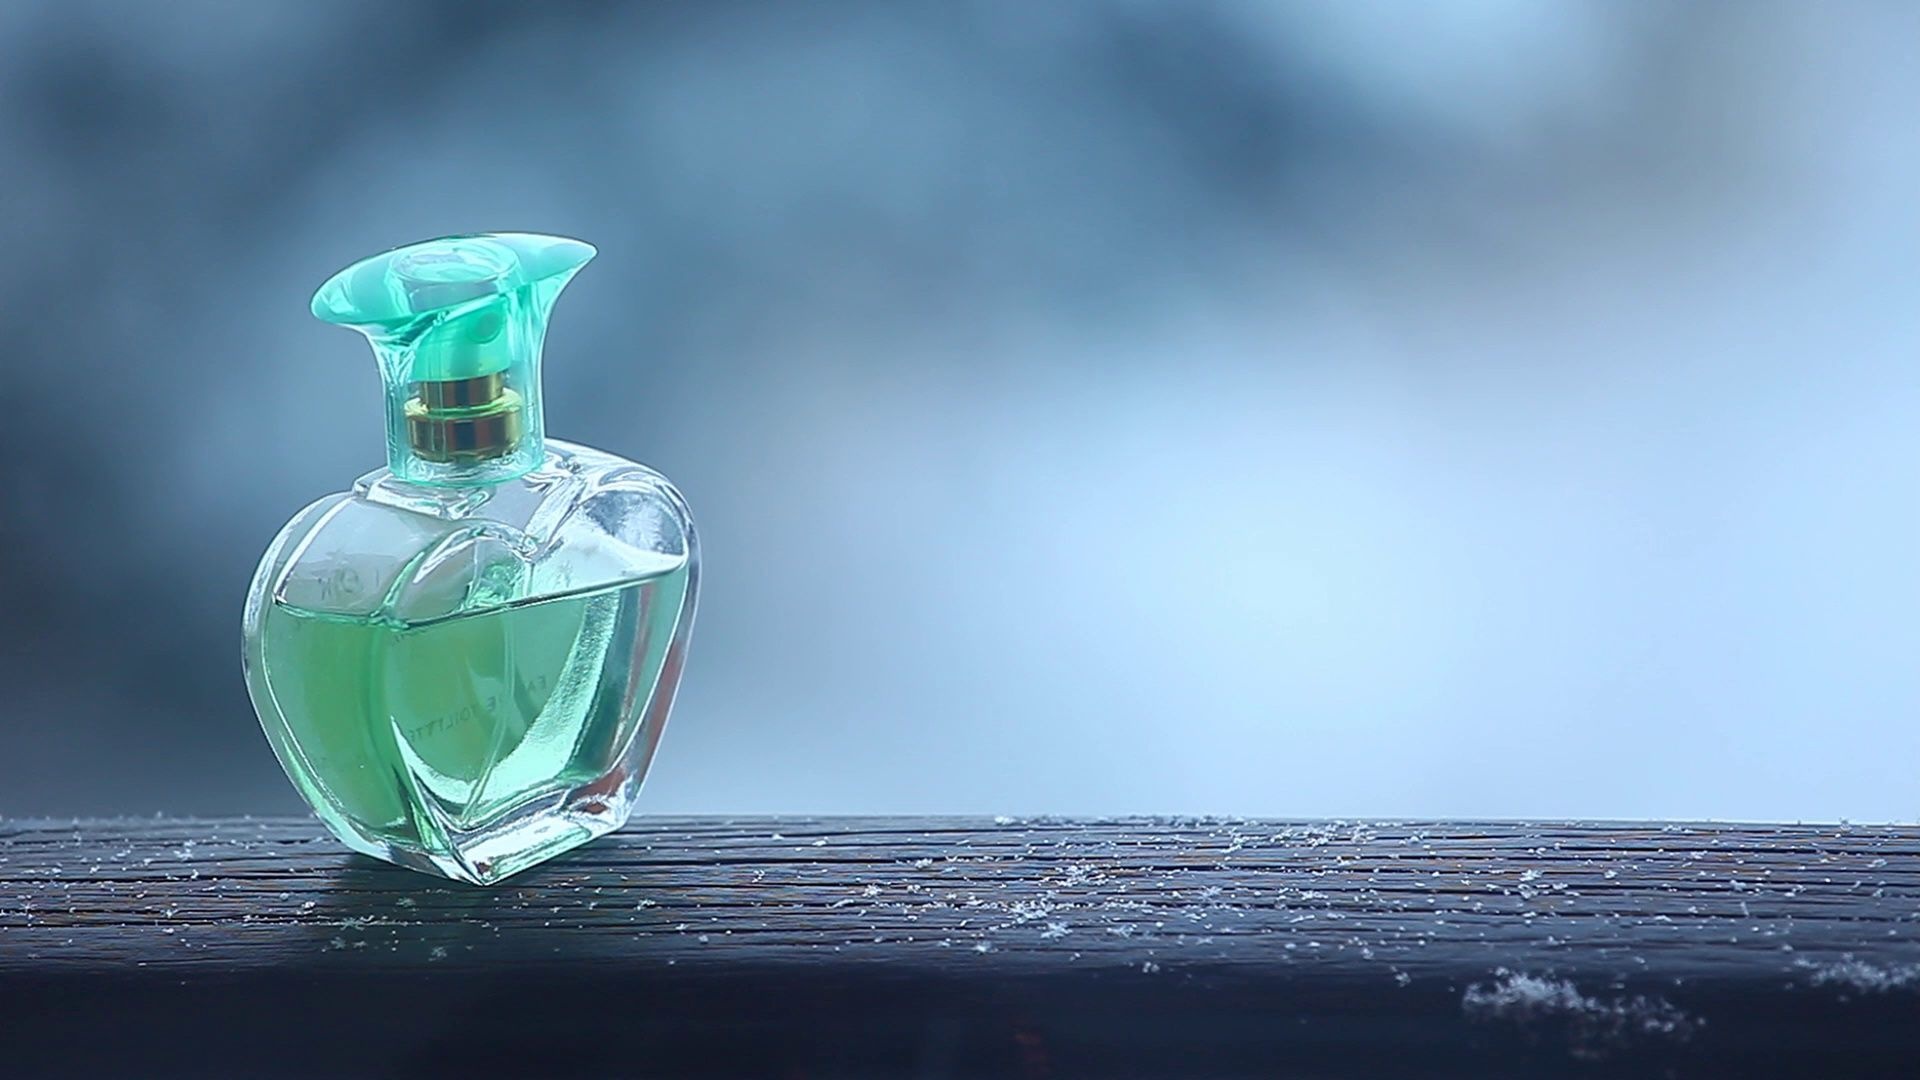 Top free fragrance wallpapers, Fragrance backgrounds, Stylish visuals, Aesthetic inspiration, 1920x1080 Full HD Desktop